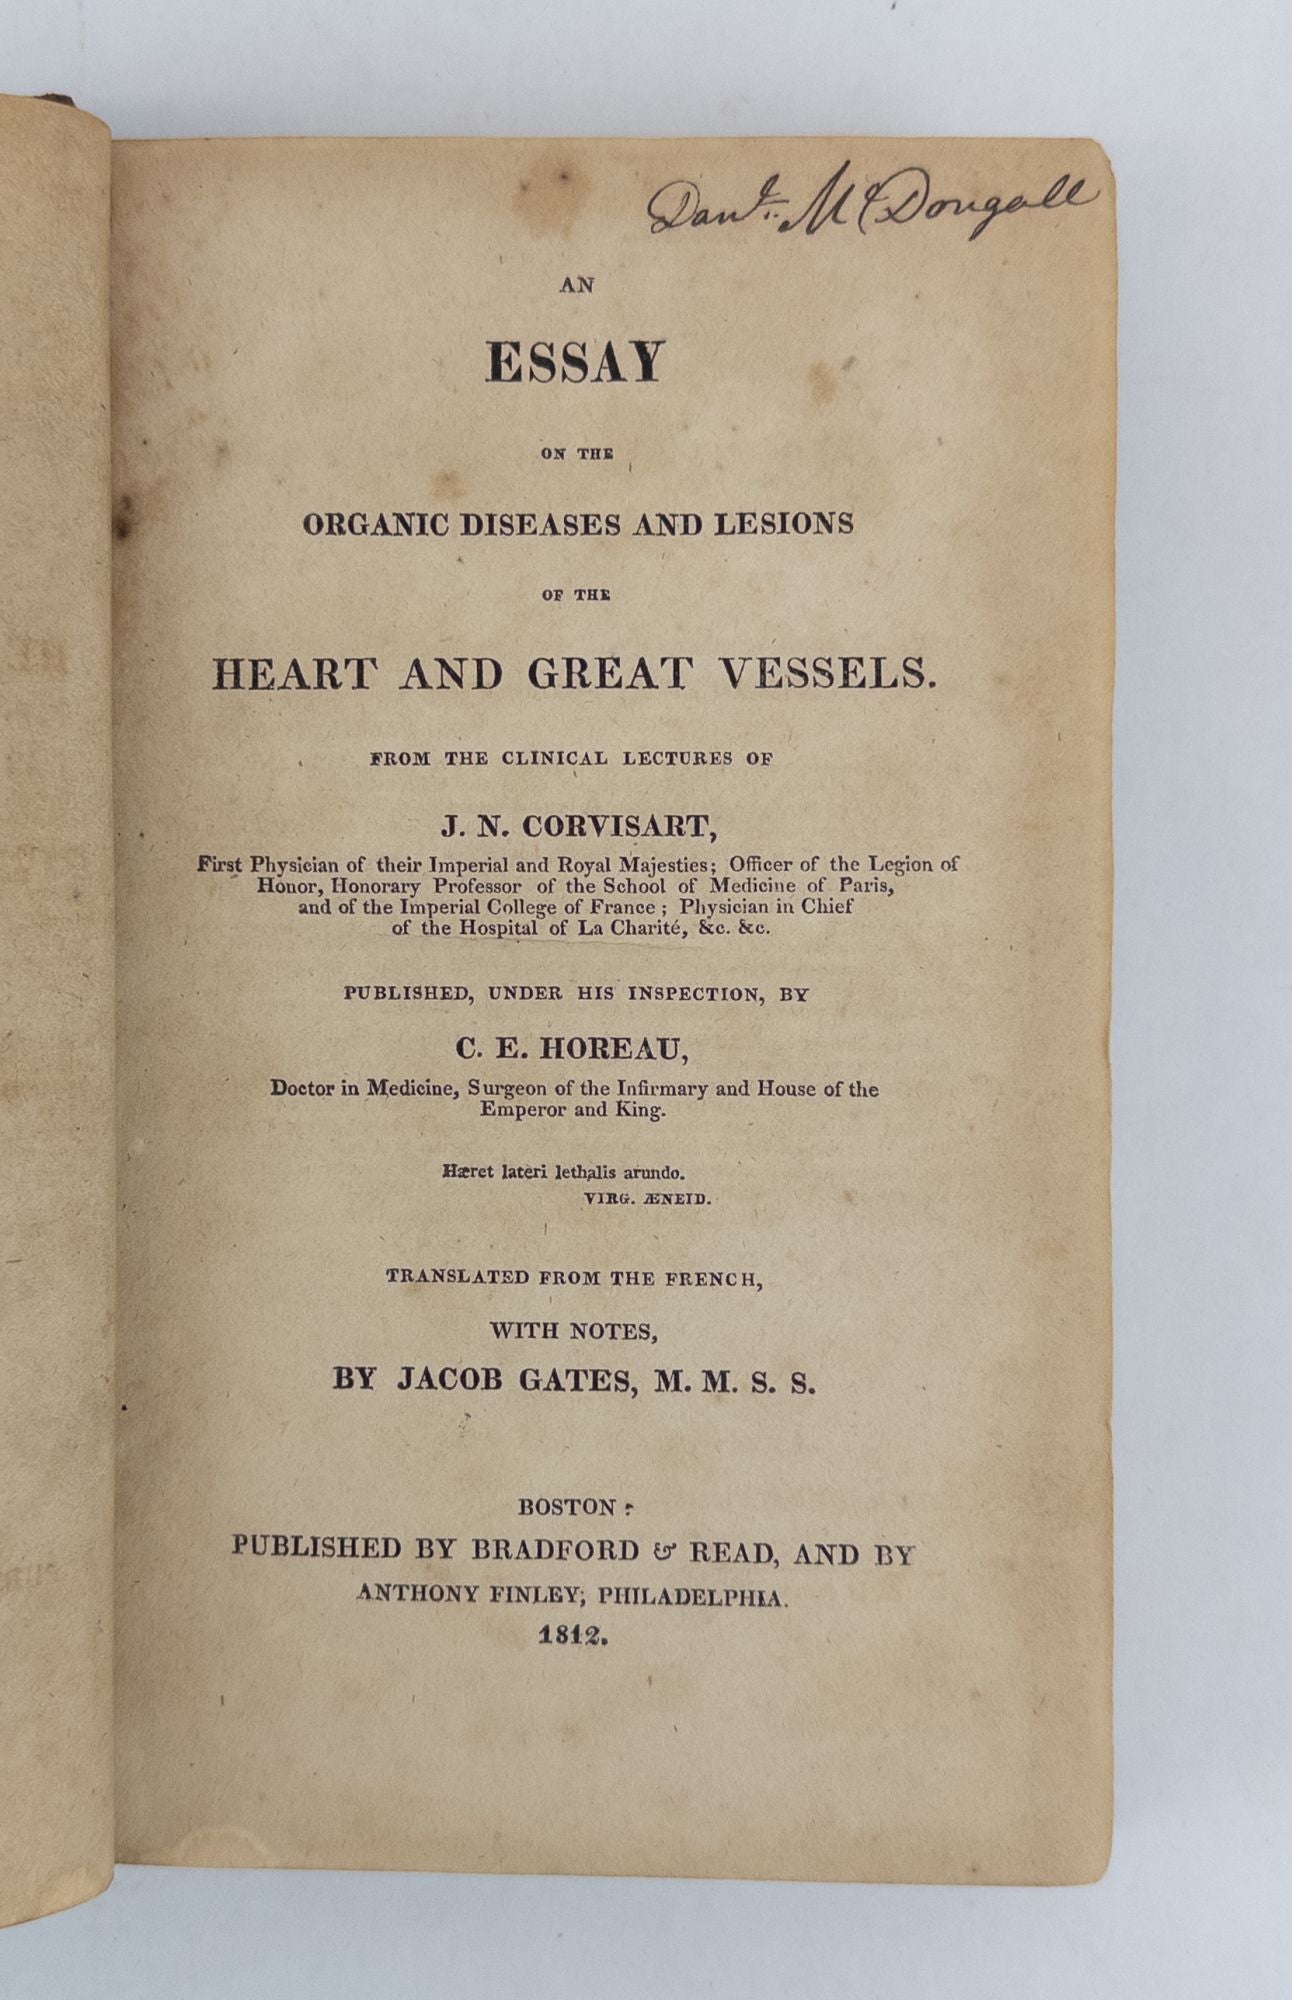 Product Image for AN ESSAY ON THE ORGANIC DISEASES AND LESIONS OF THE HEART AND GREAT VESSELS FROM THE CLINICAL LECTURES OF J. N. CORVISART